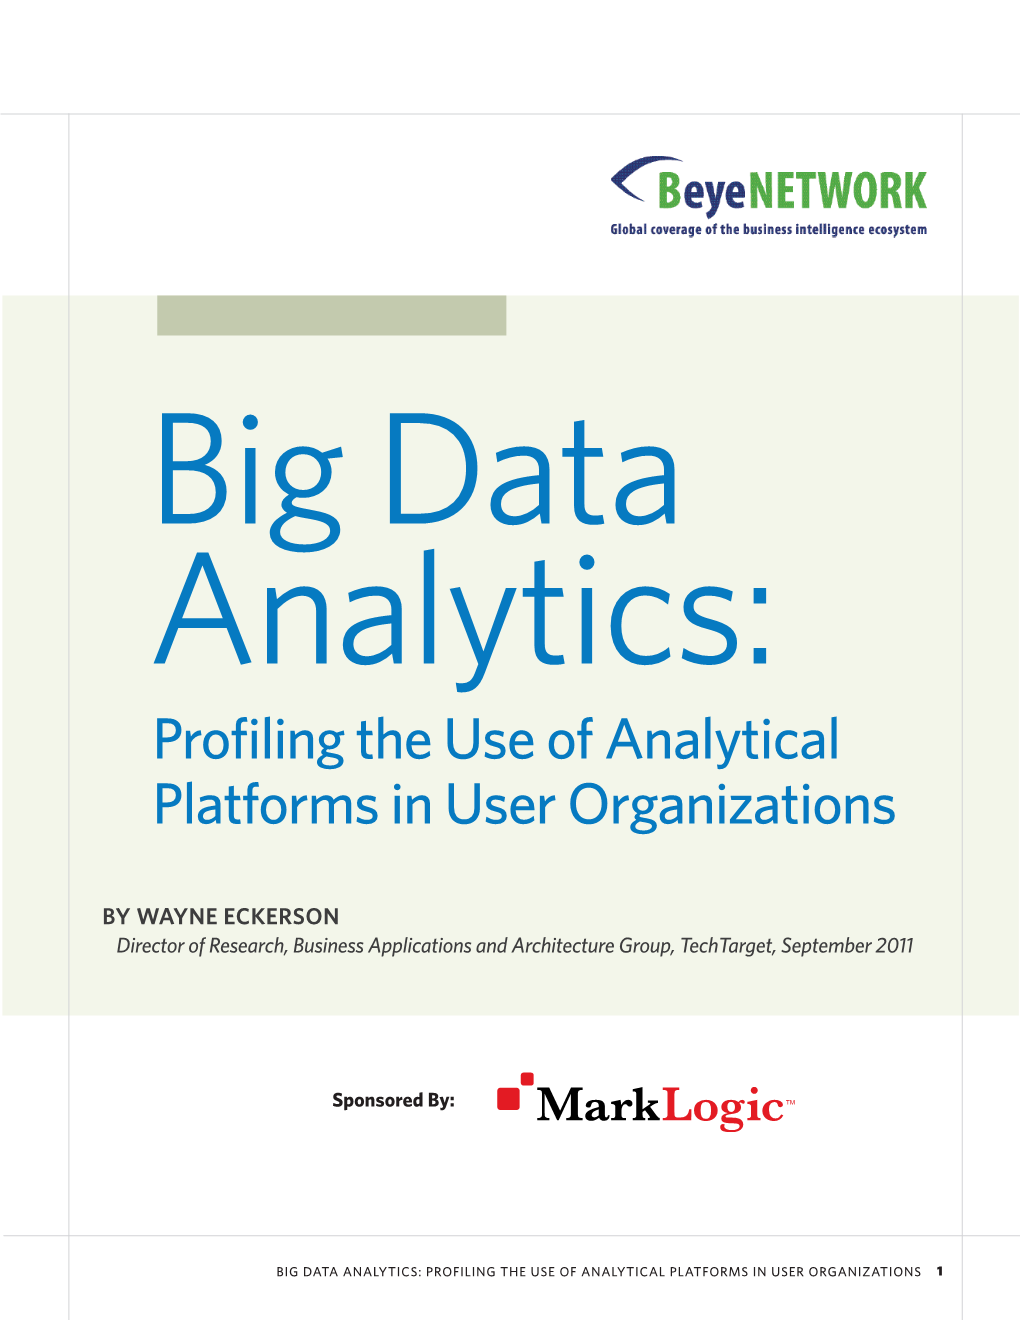 Profiling the Use of Analytical Platforms in User Organizations